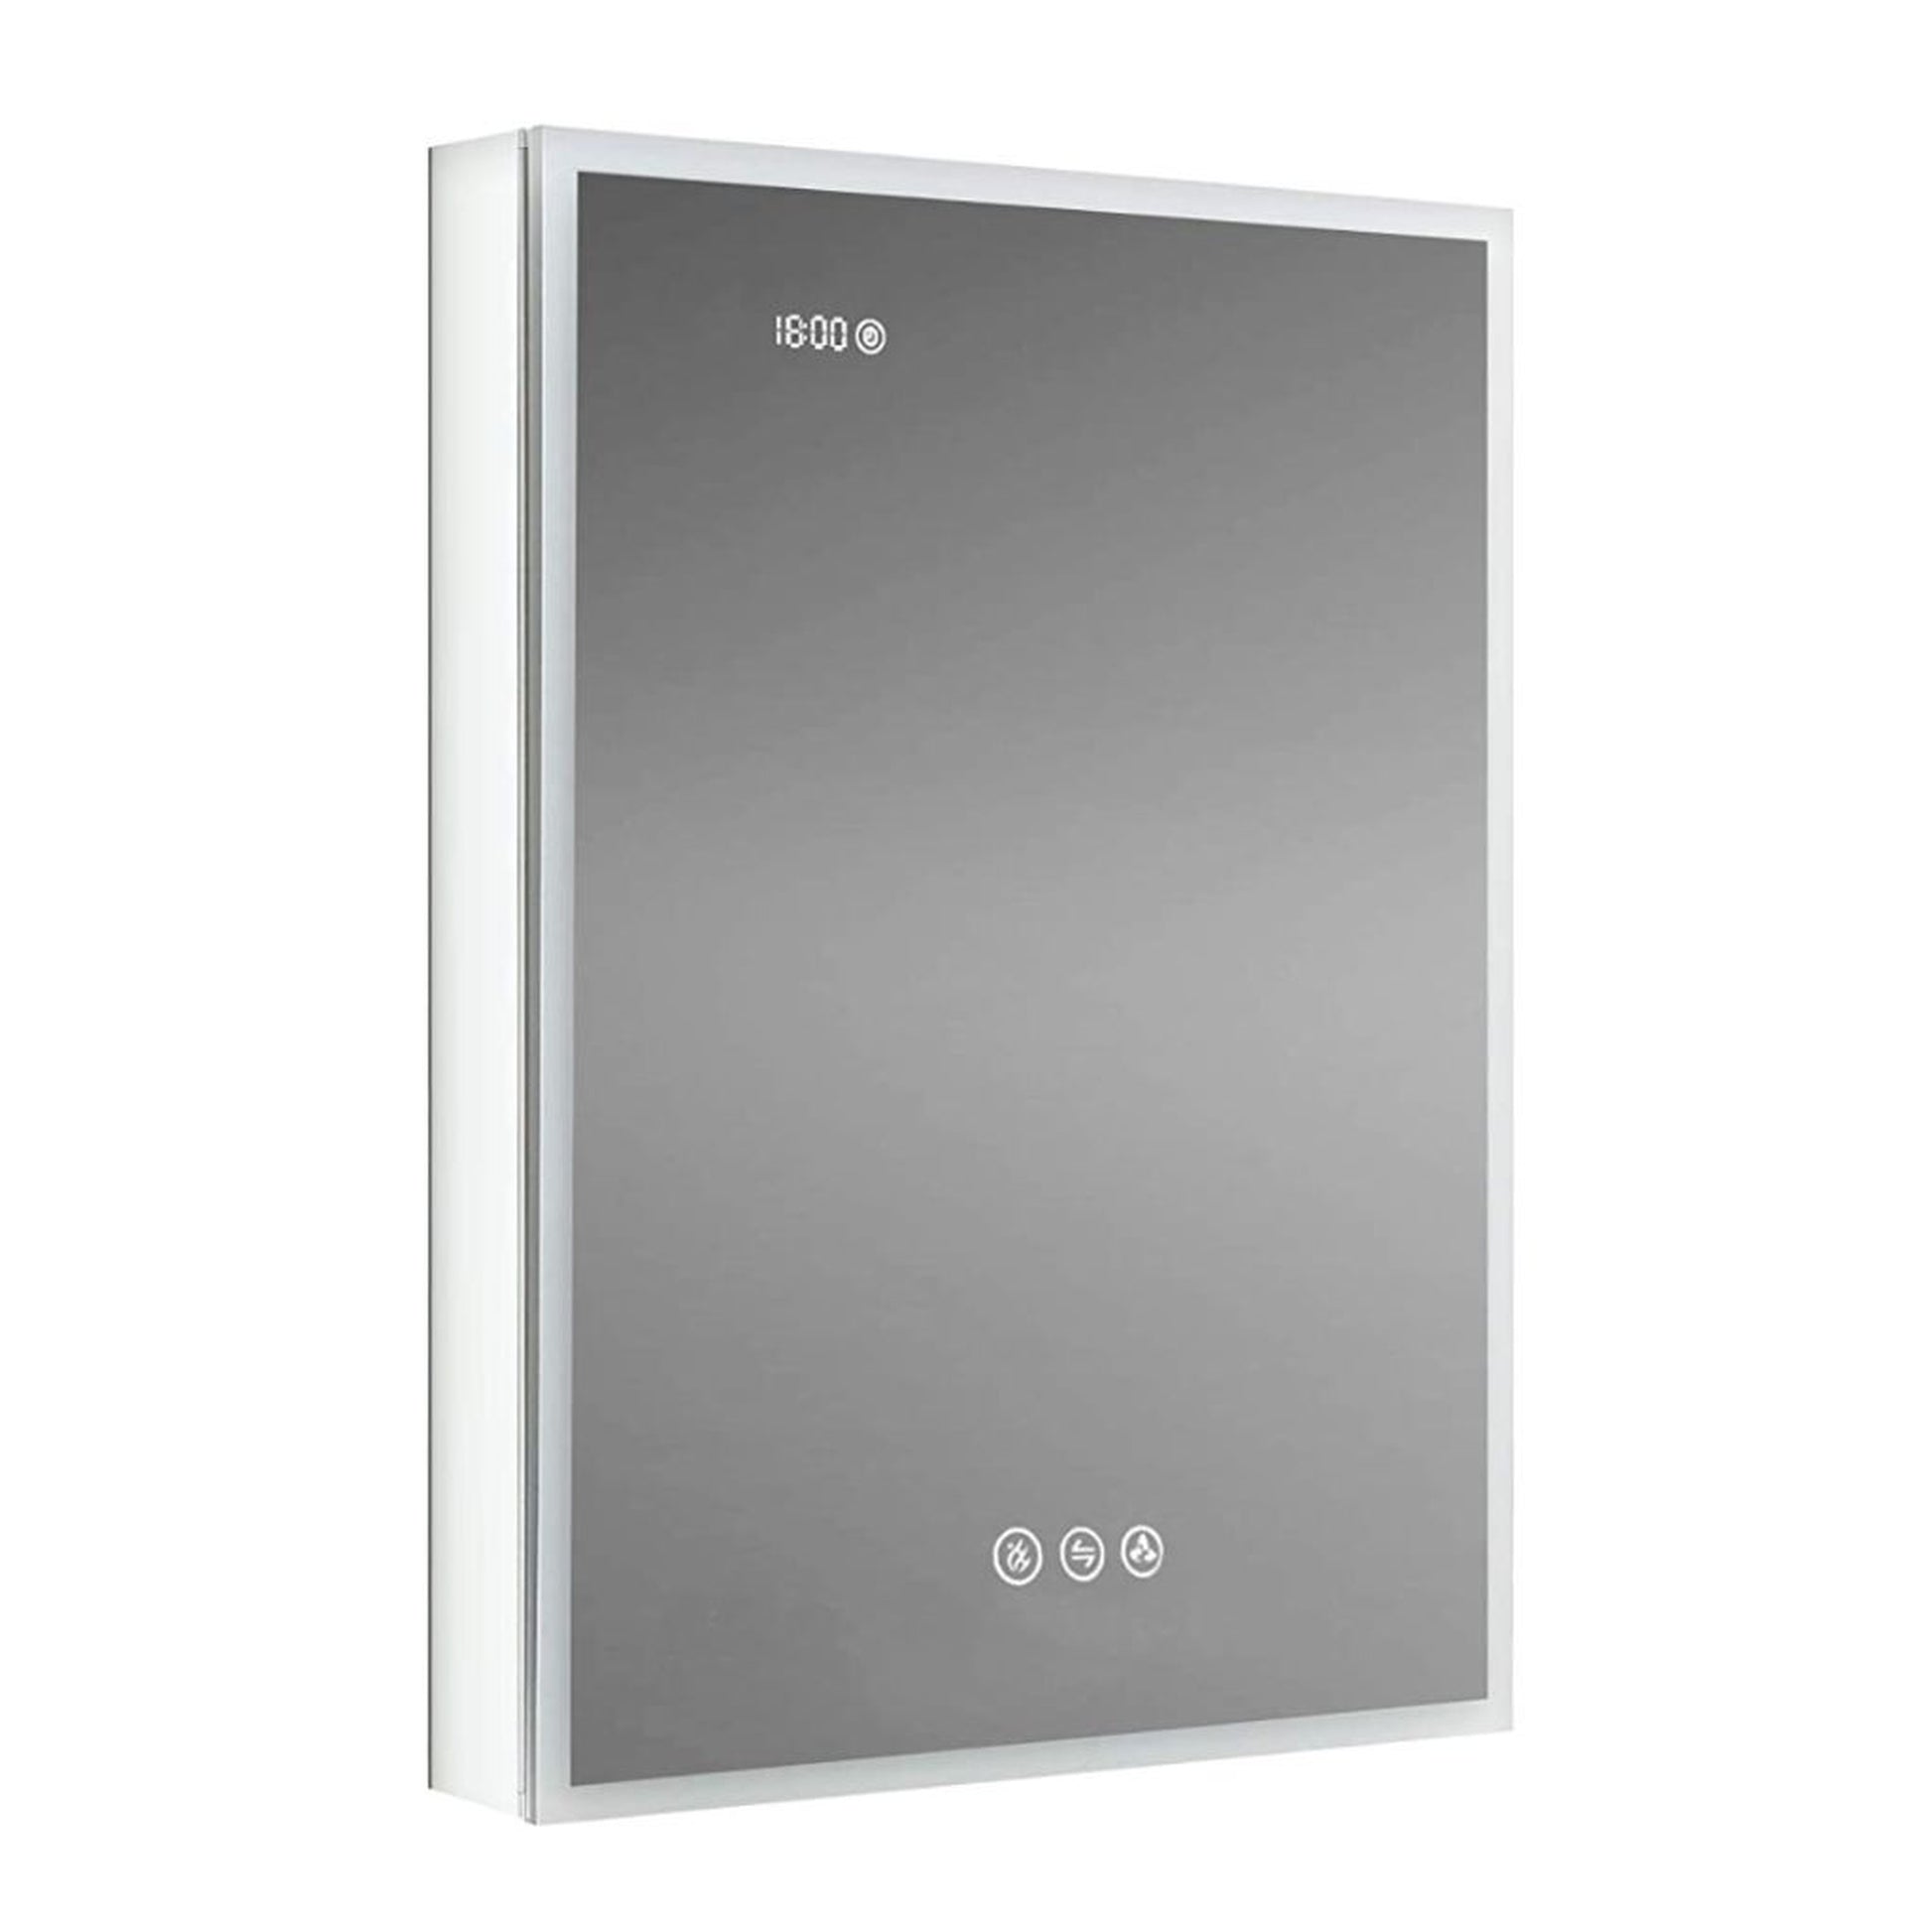 Blossom Sirius 20" x 32" Recessed or Surface Mount Right-Hinged Door LED Mirror Medicine Cabinet With 3 Adjustable Glass Shelves, Built-In Defogger, Dimmer, USB & Electrical Outlet